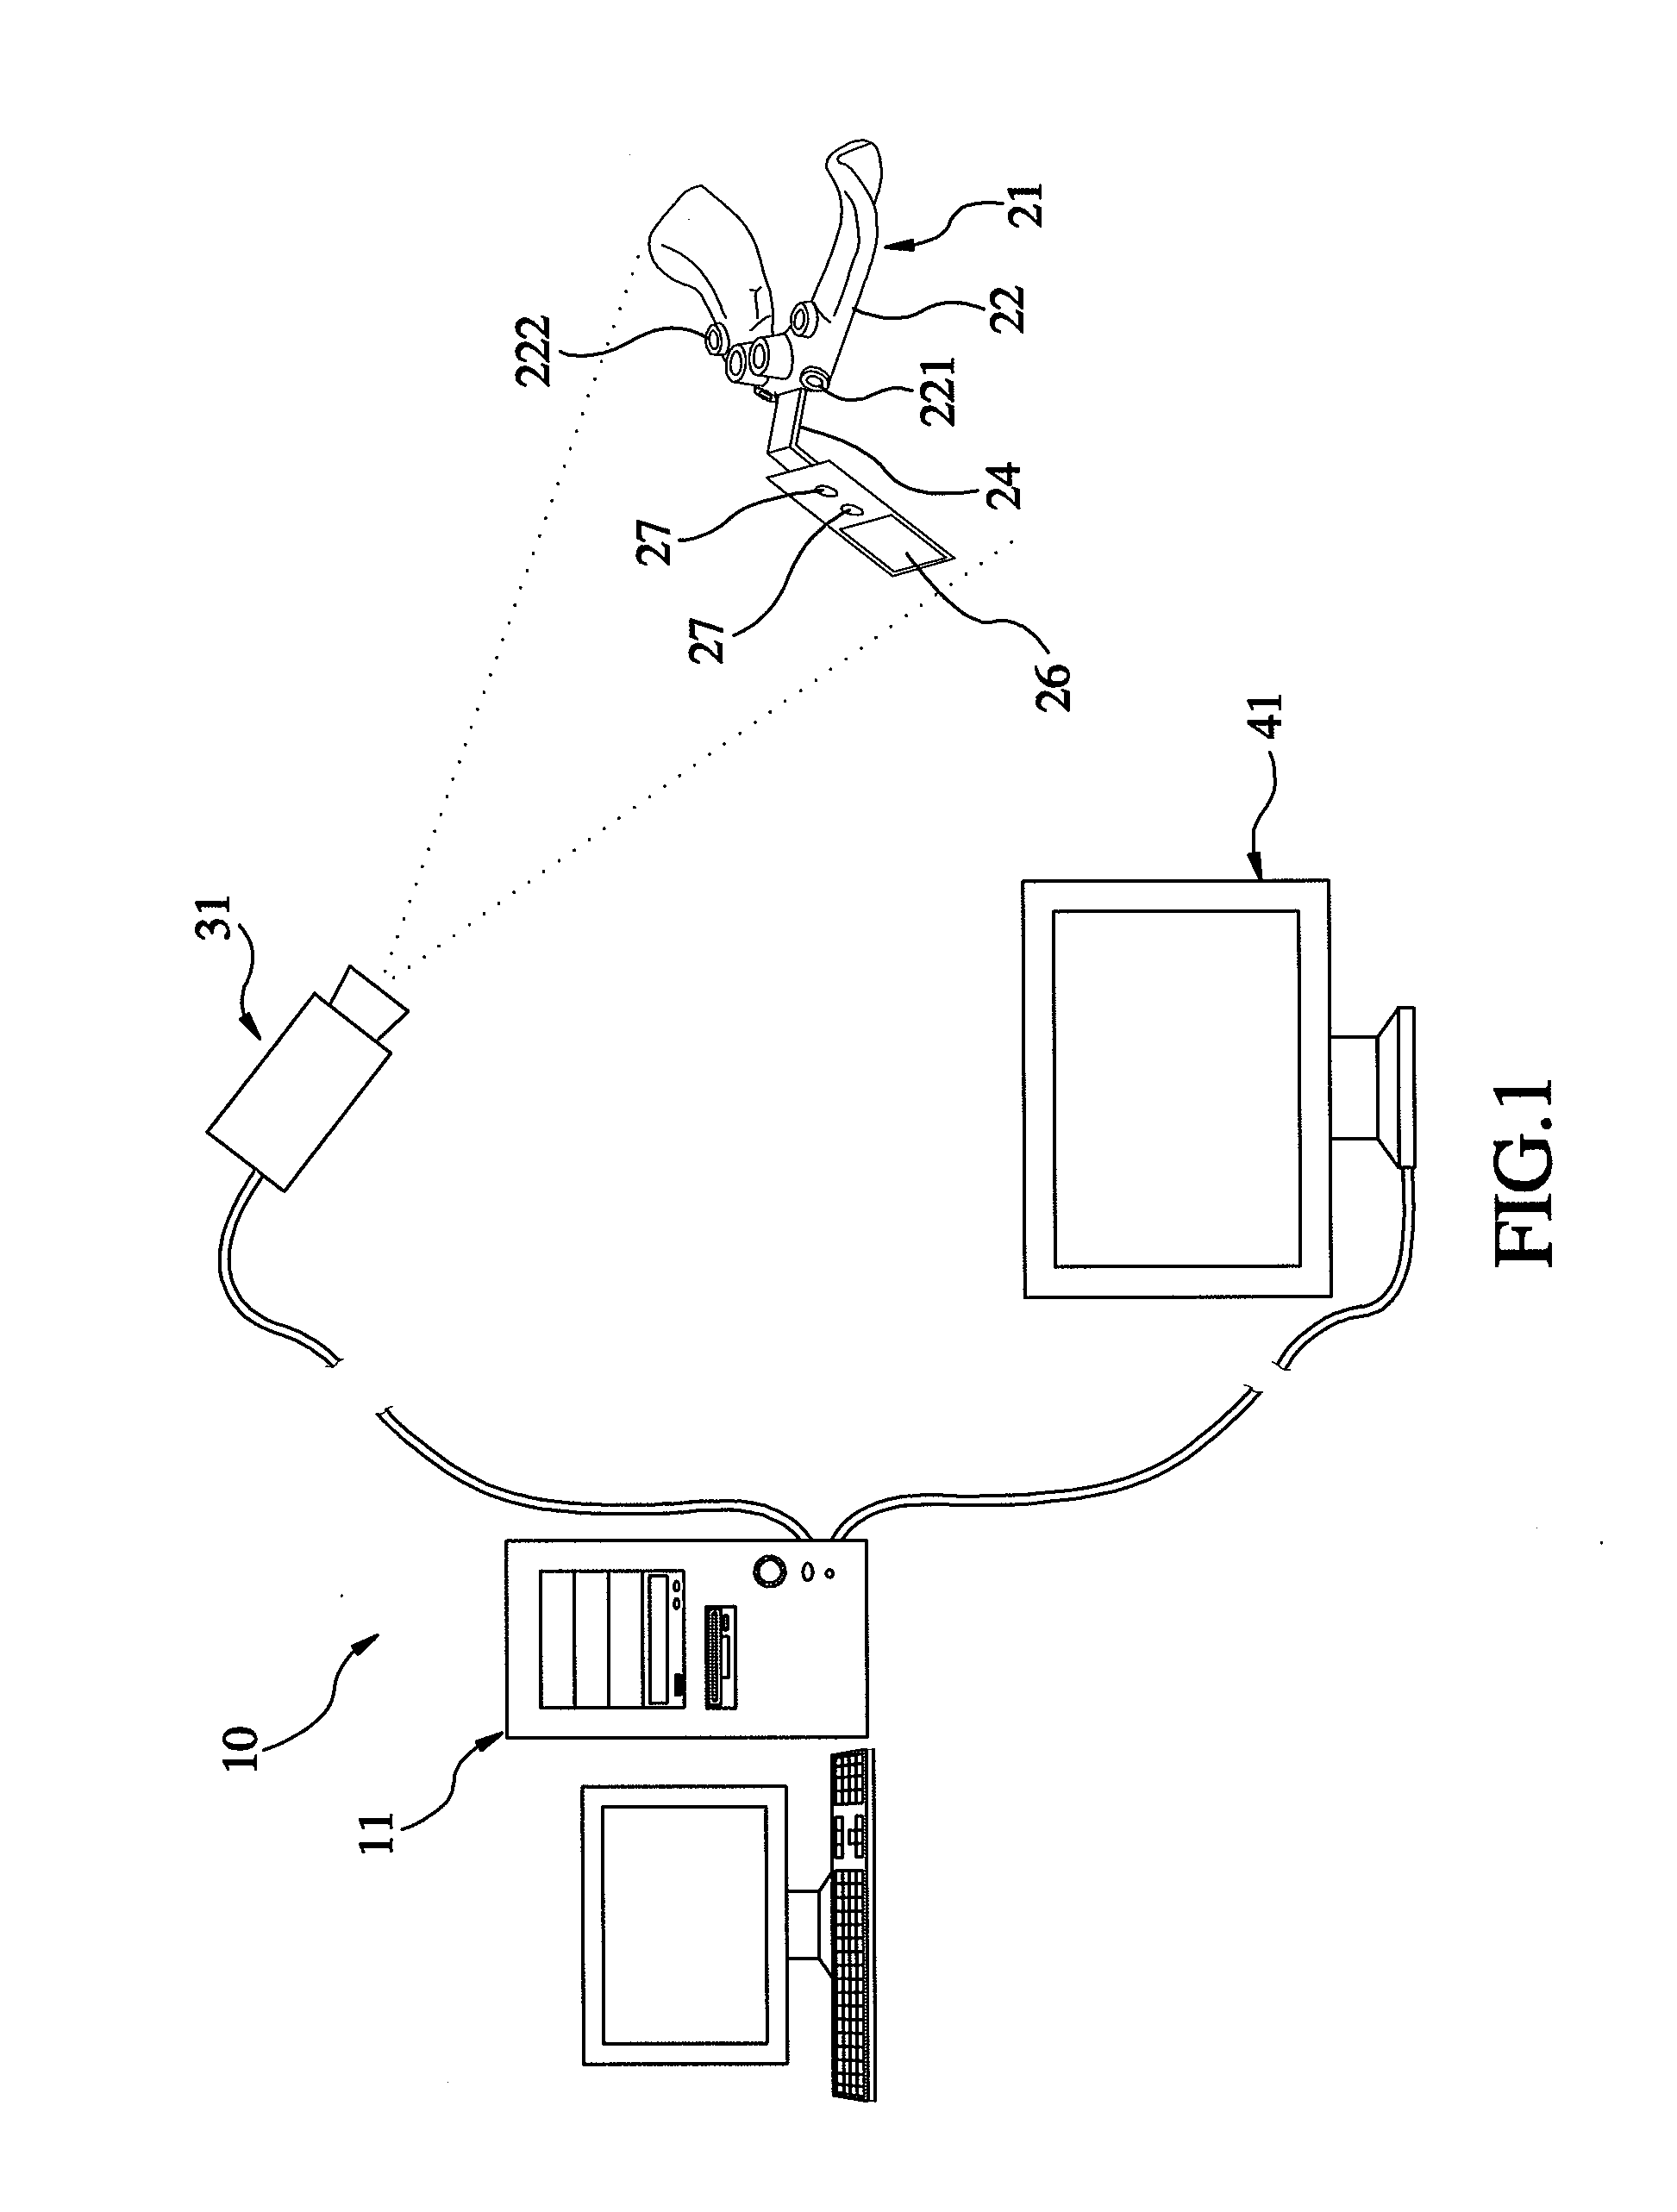 Computer-aided positioning and navigation system for dental implant